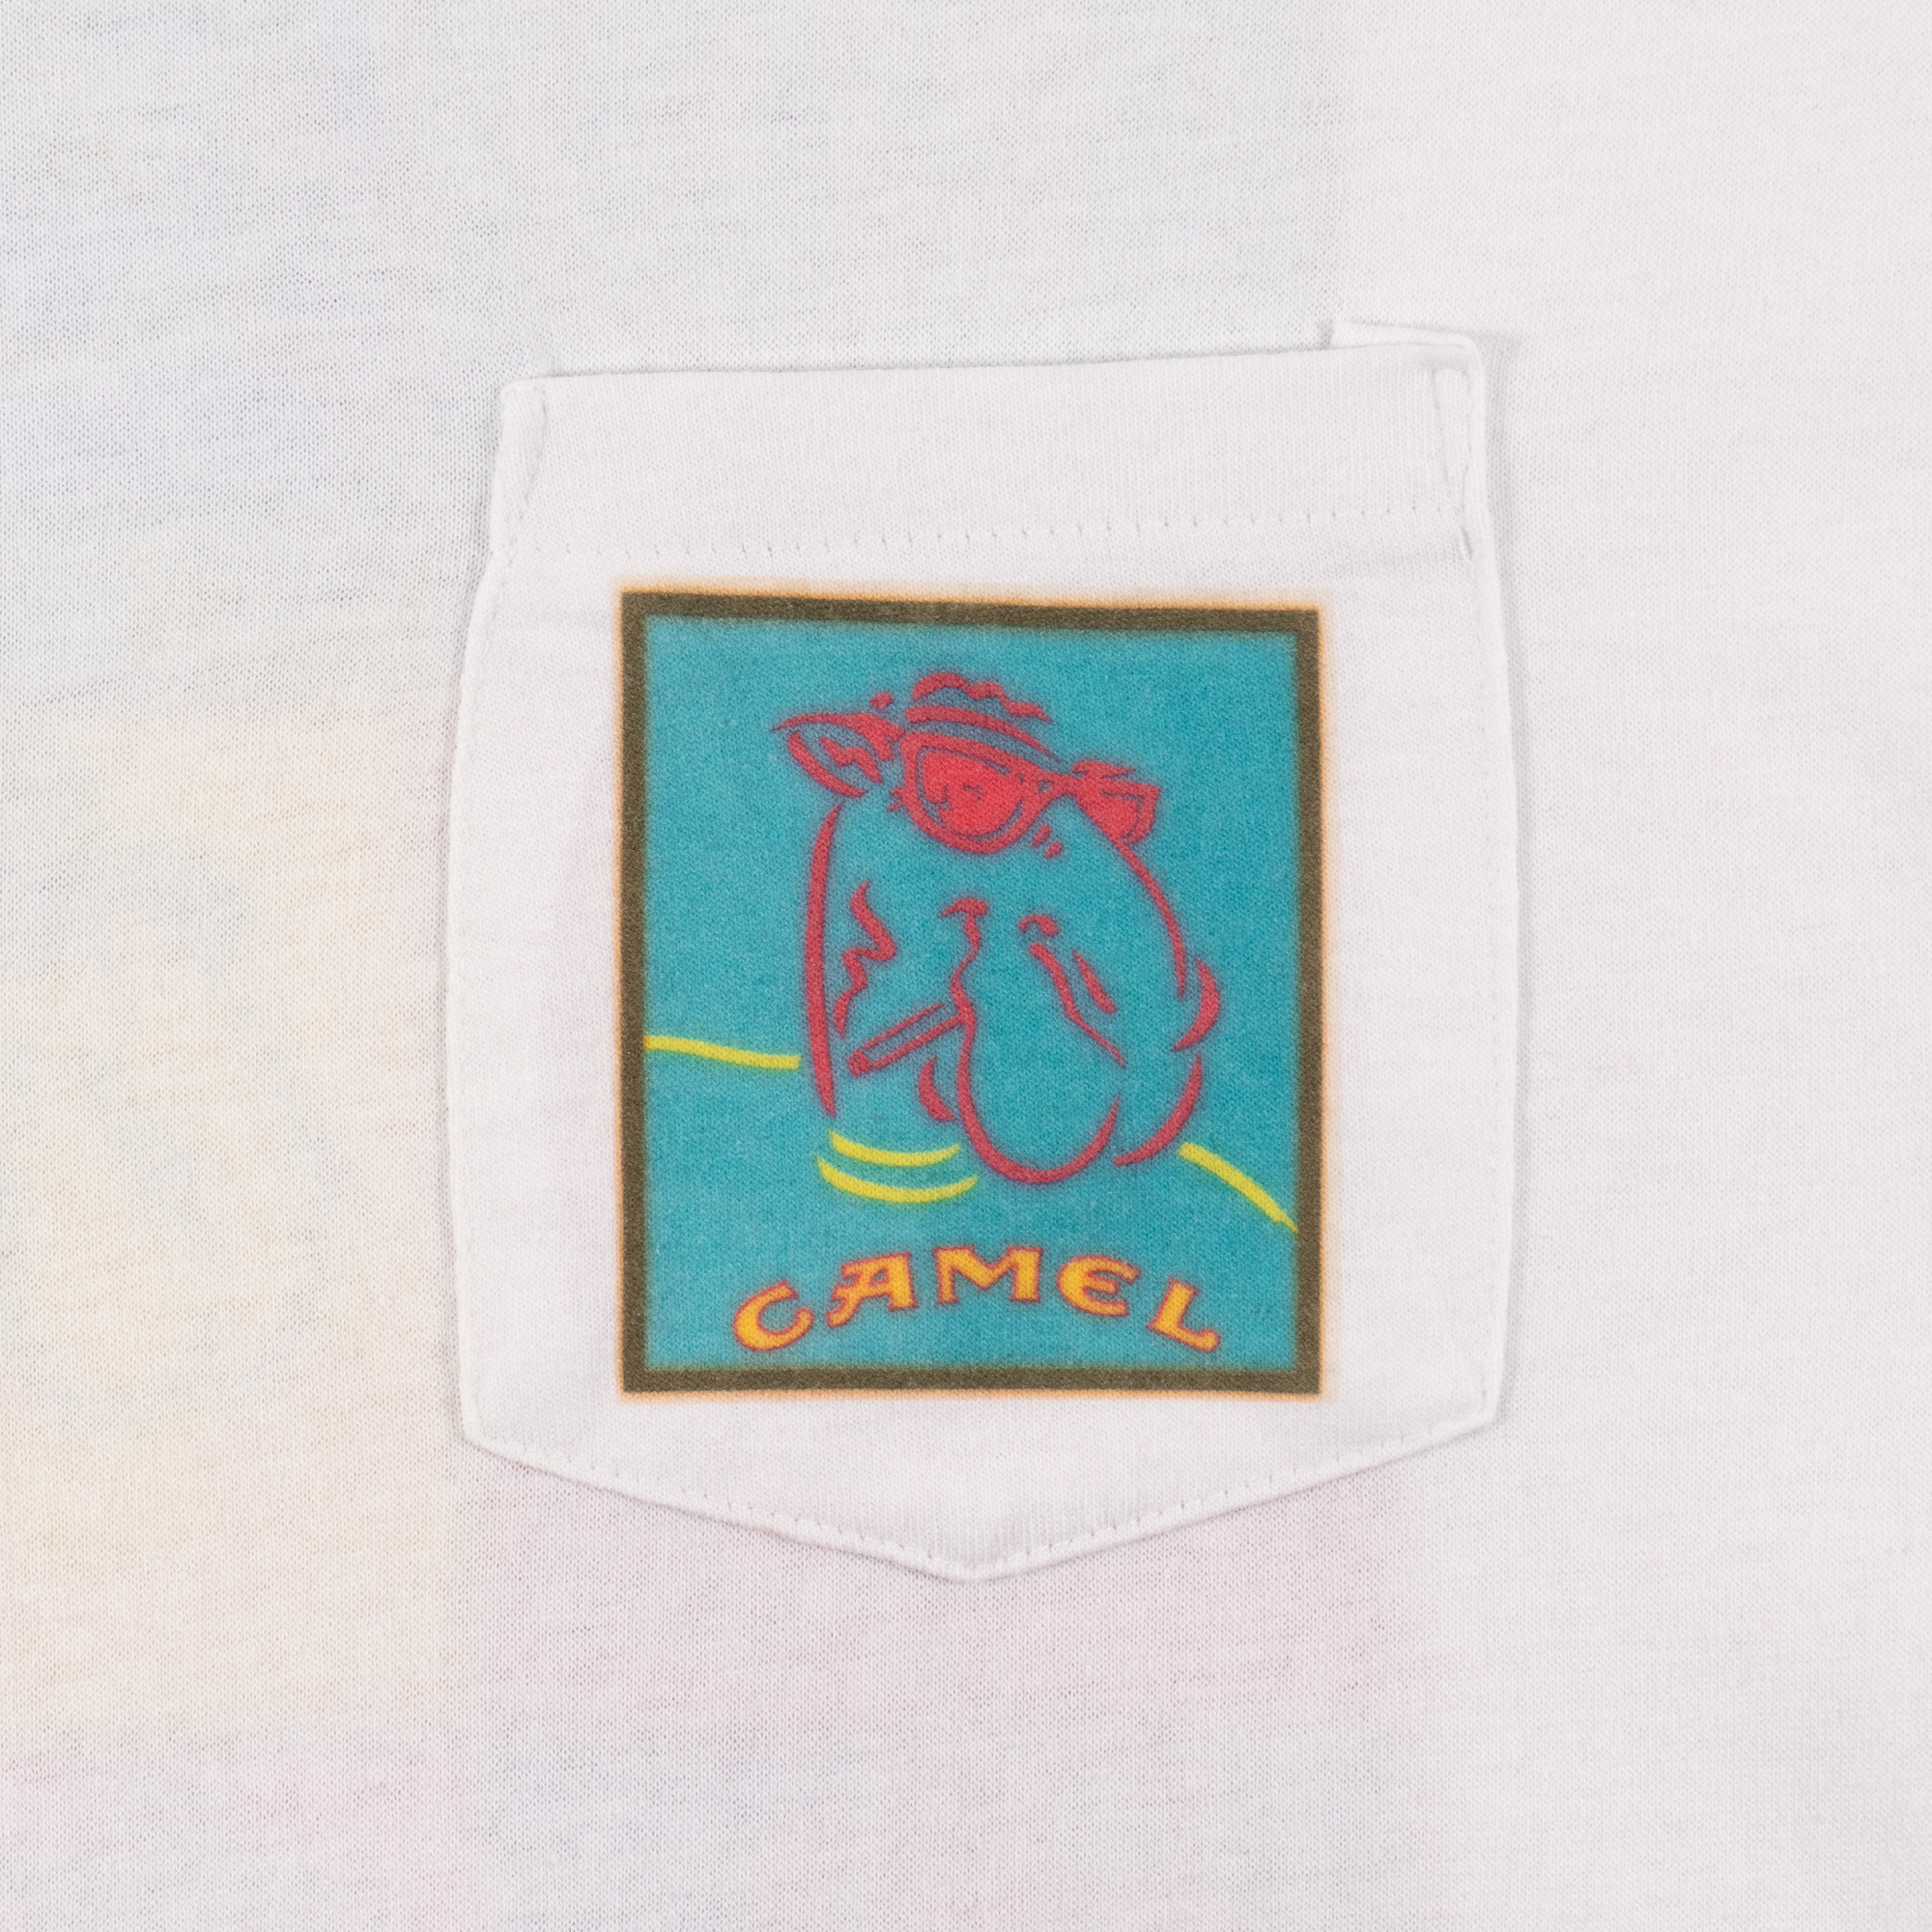 Warhol Inspired Coloured Squares Camel Cigarettes Tee White-PLUS